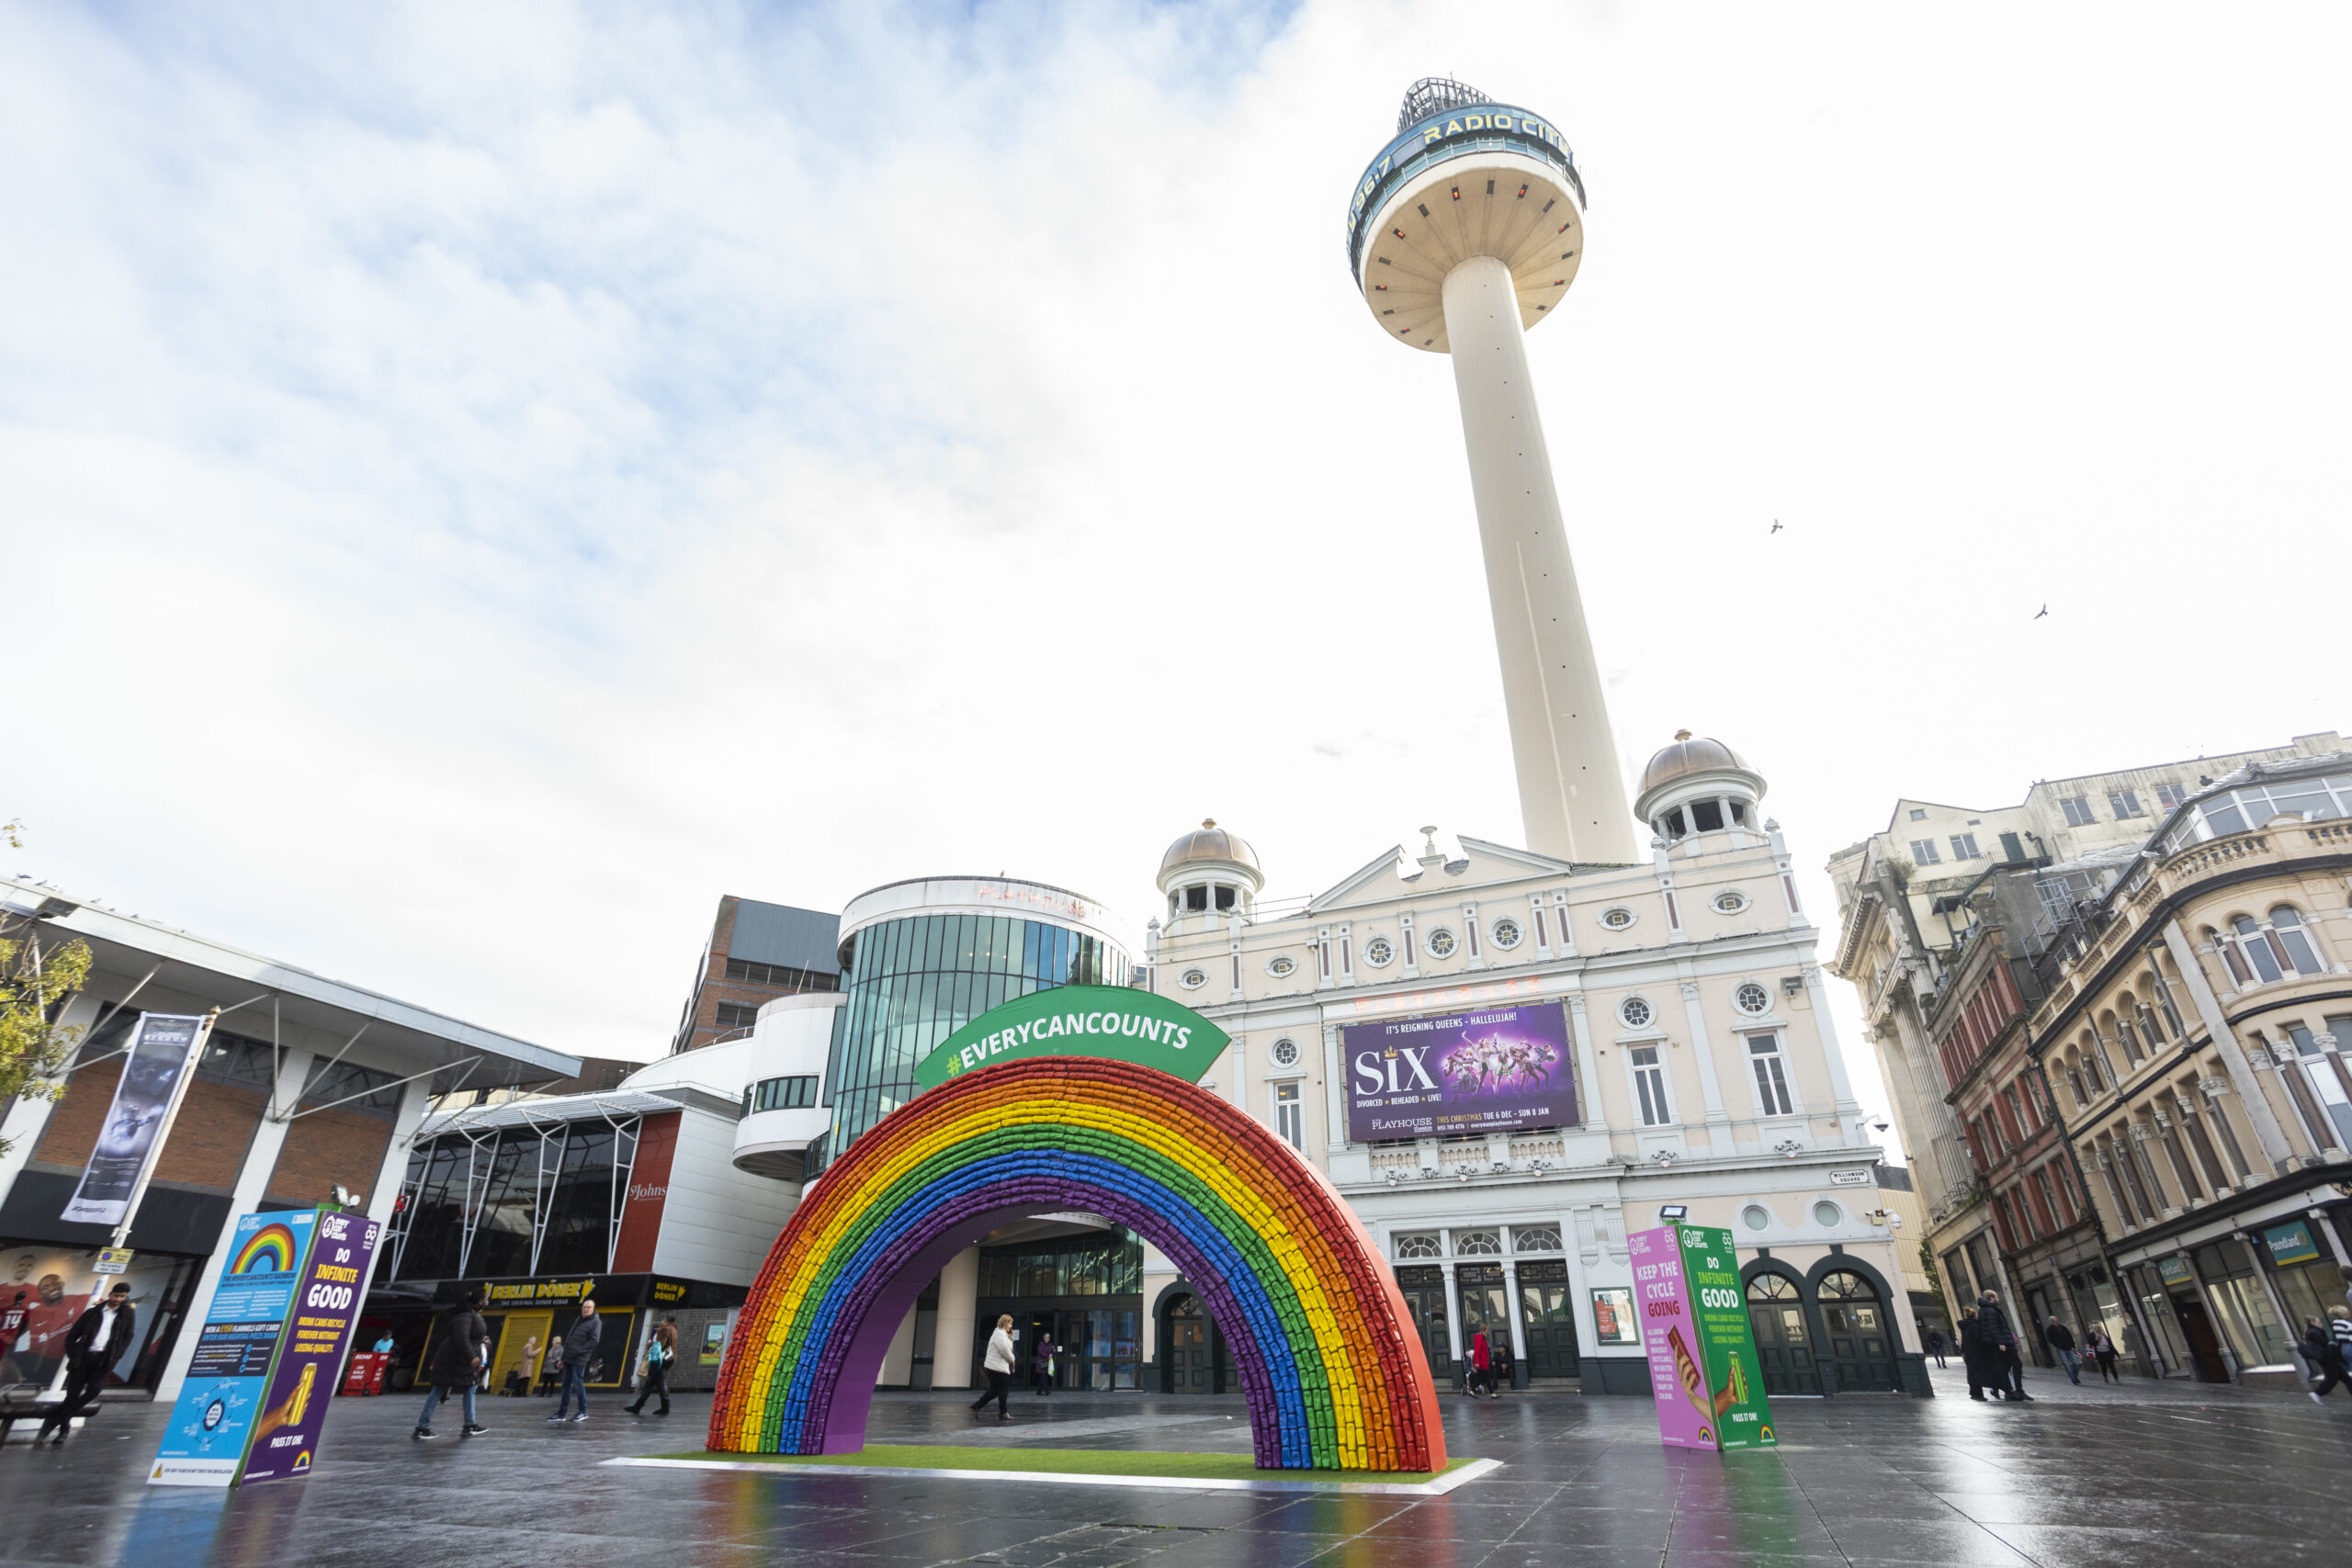 A giant rainbow is placed in Williamson Square in Liverpool, Merseyside, for the start of Recycle Week 2022.